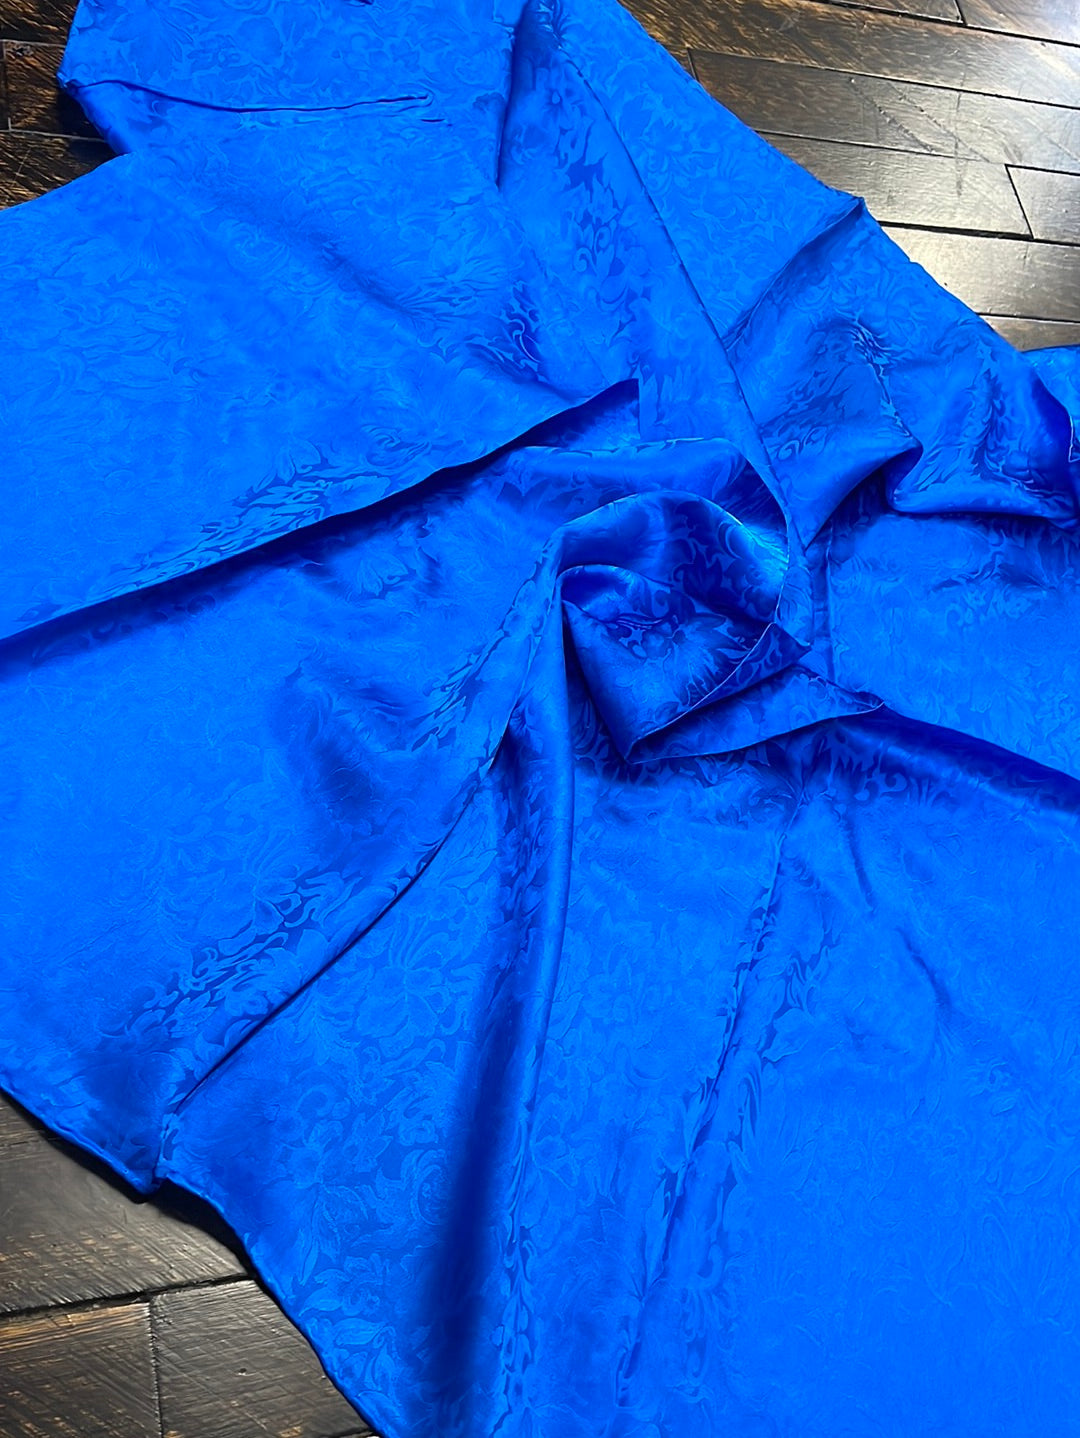 Etched Electric Blue Wild Rag - full size